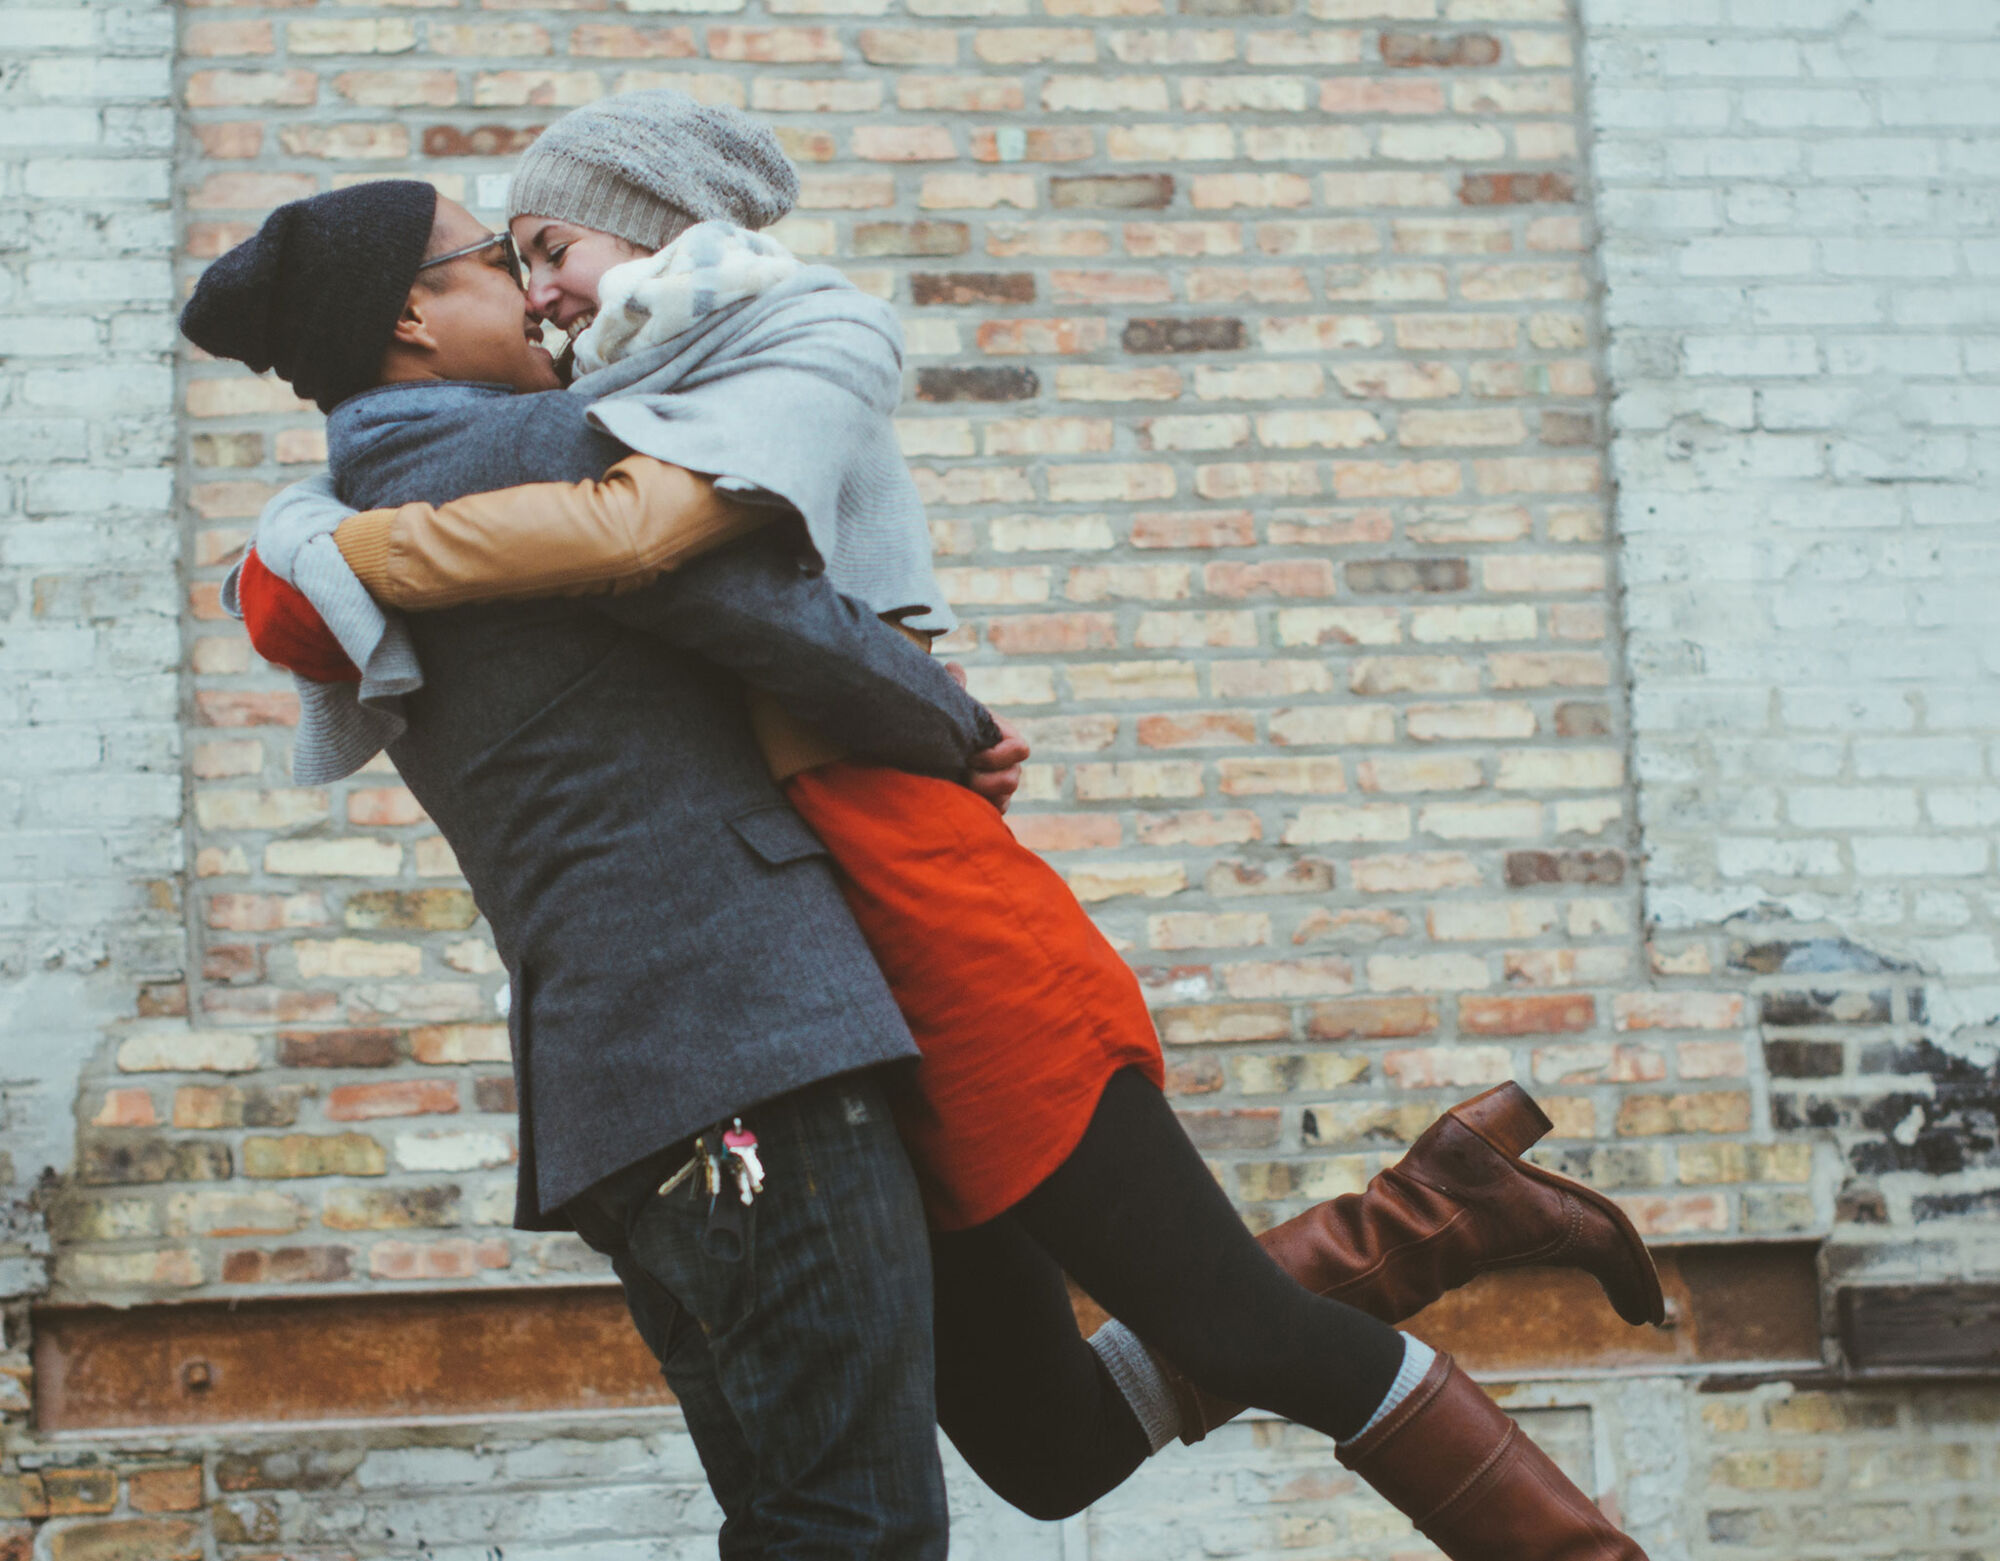 A man holds a woman up happily as they embrace in front of a brick wall.